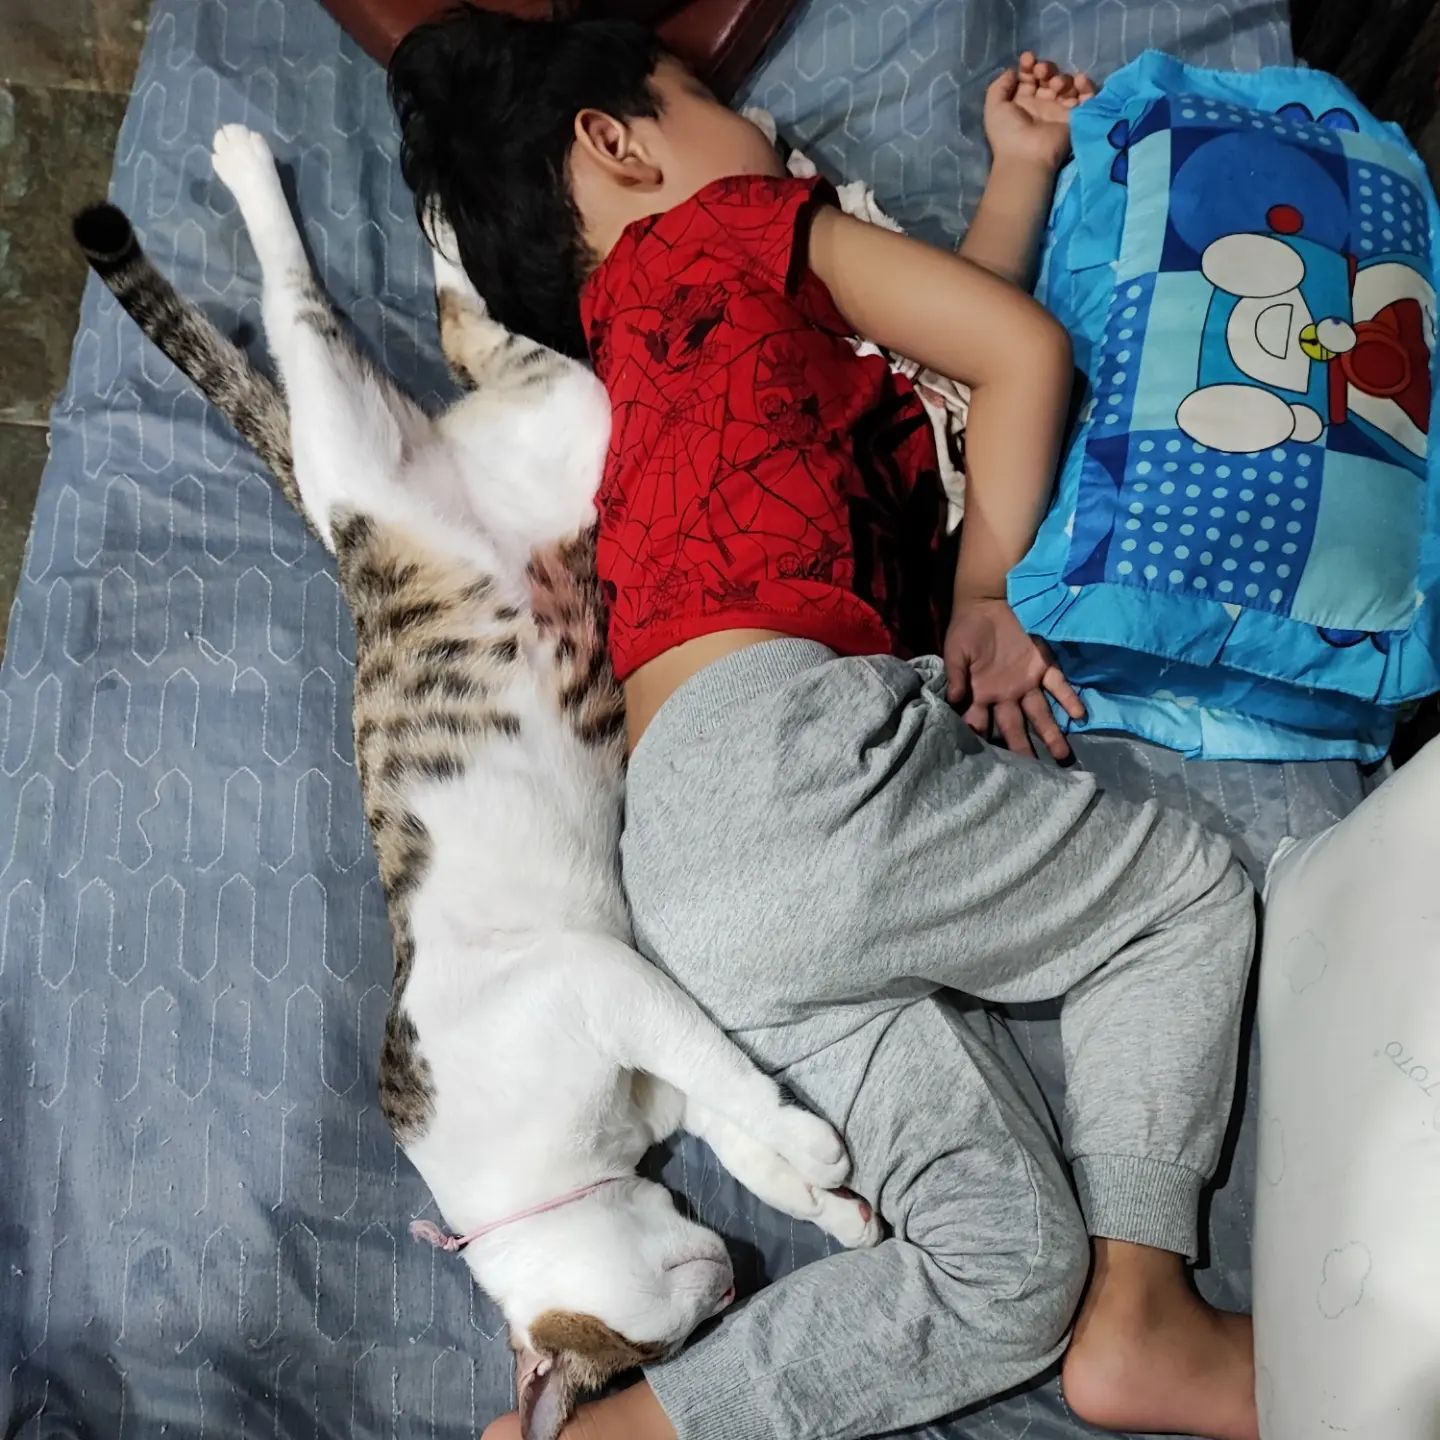 child stretched out asleep with cat stretched out next to him